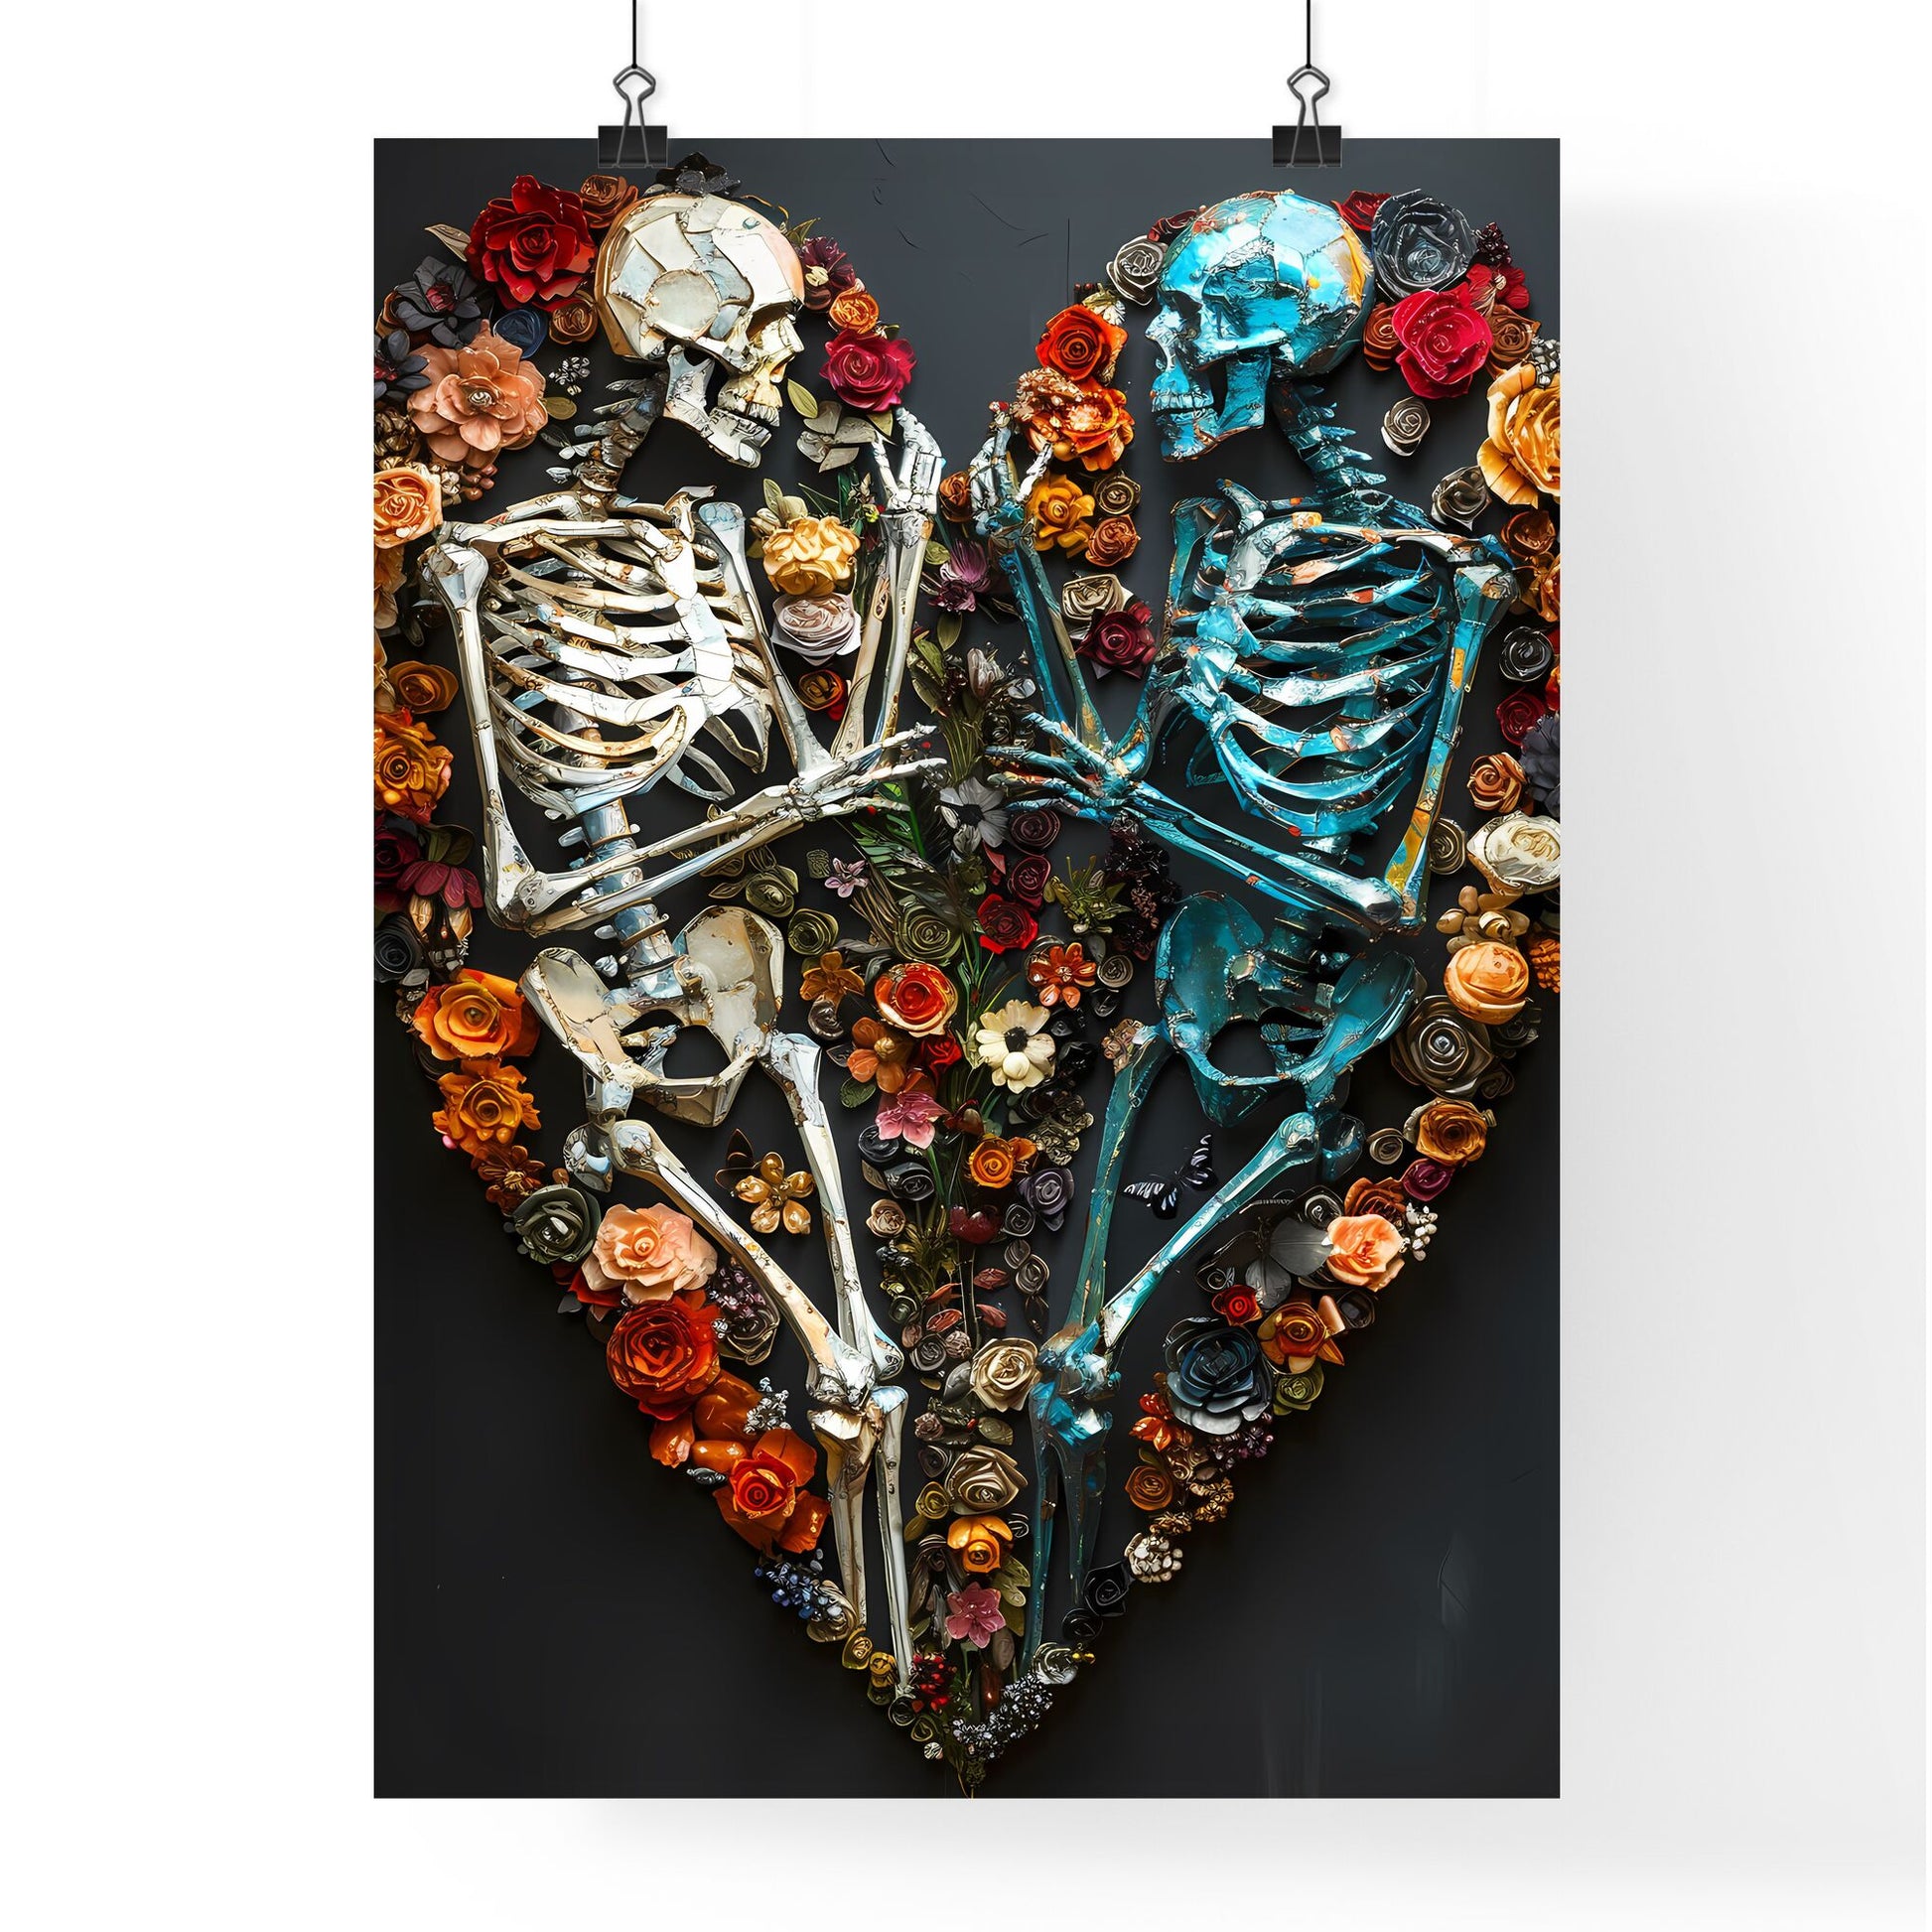 Floral Pop Art Heart Skeleton Embrace with Museum Pop Culture Backdrop, Botanical Bohemian Art Inspired by Frazetta and Wrightson Default Title